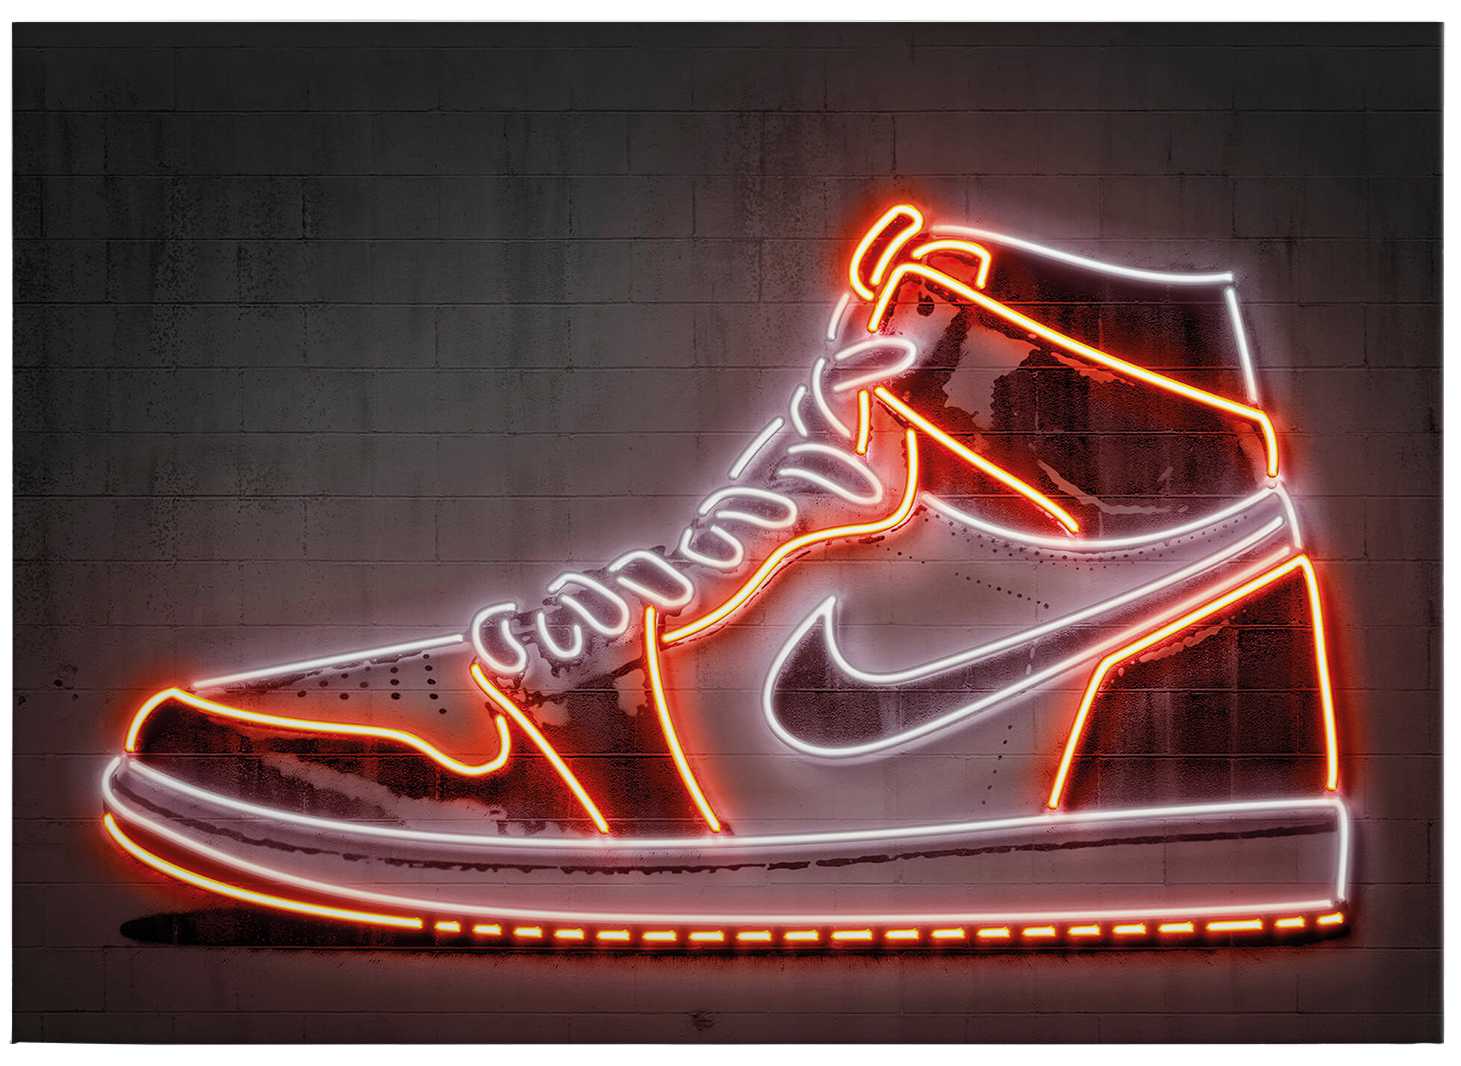             Canvas print neon sign "Sneaker" by Mielu
        